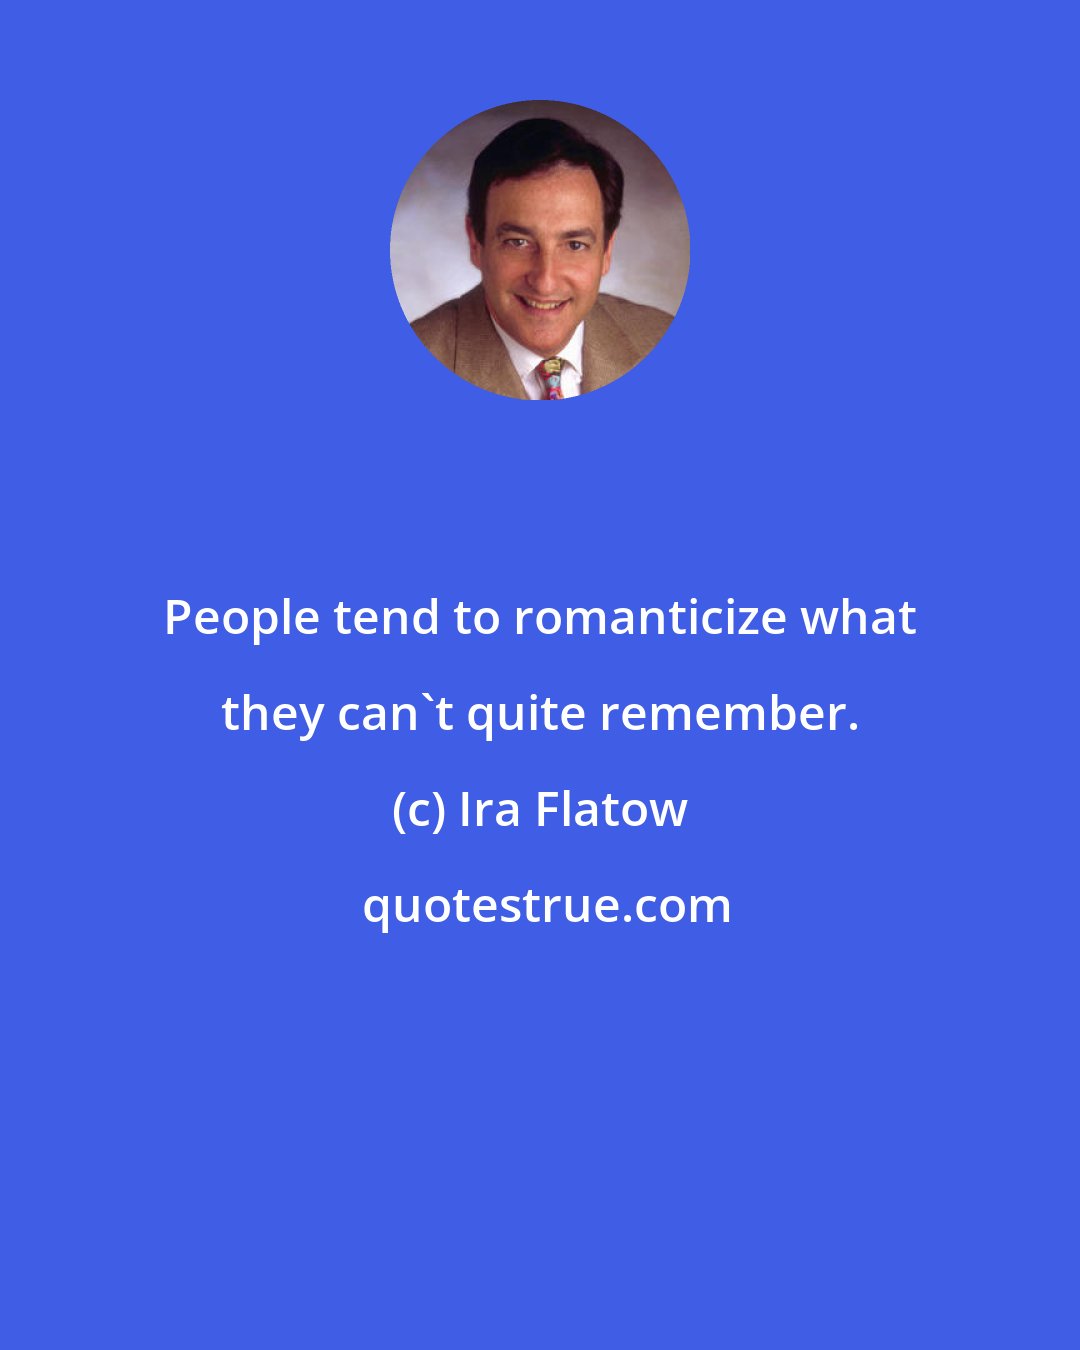 Ira Flatow: People tend to romanticize what they can't quite remember.